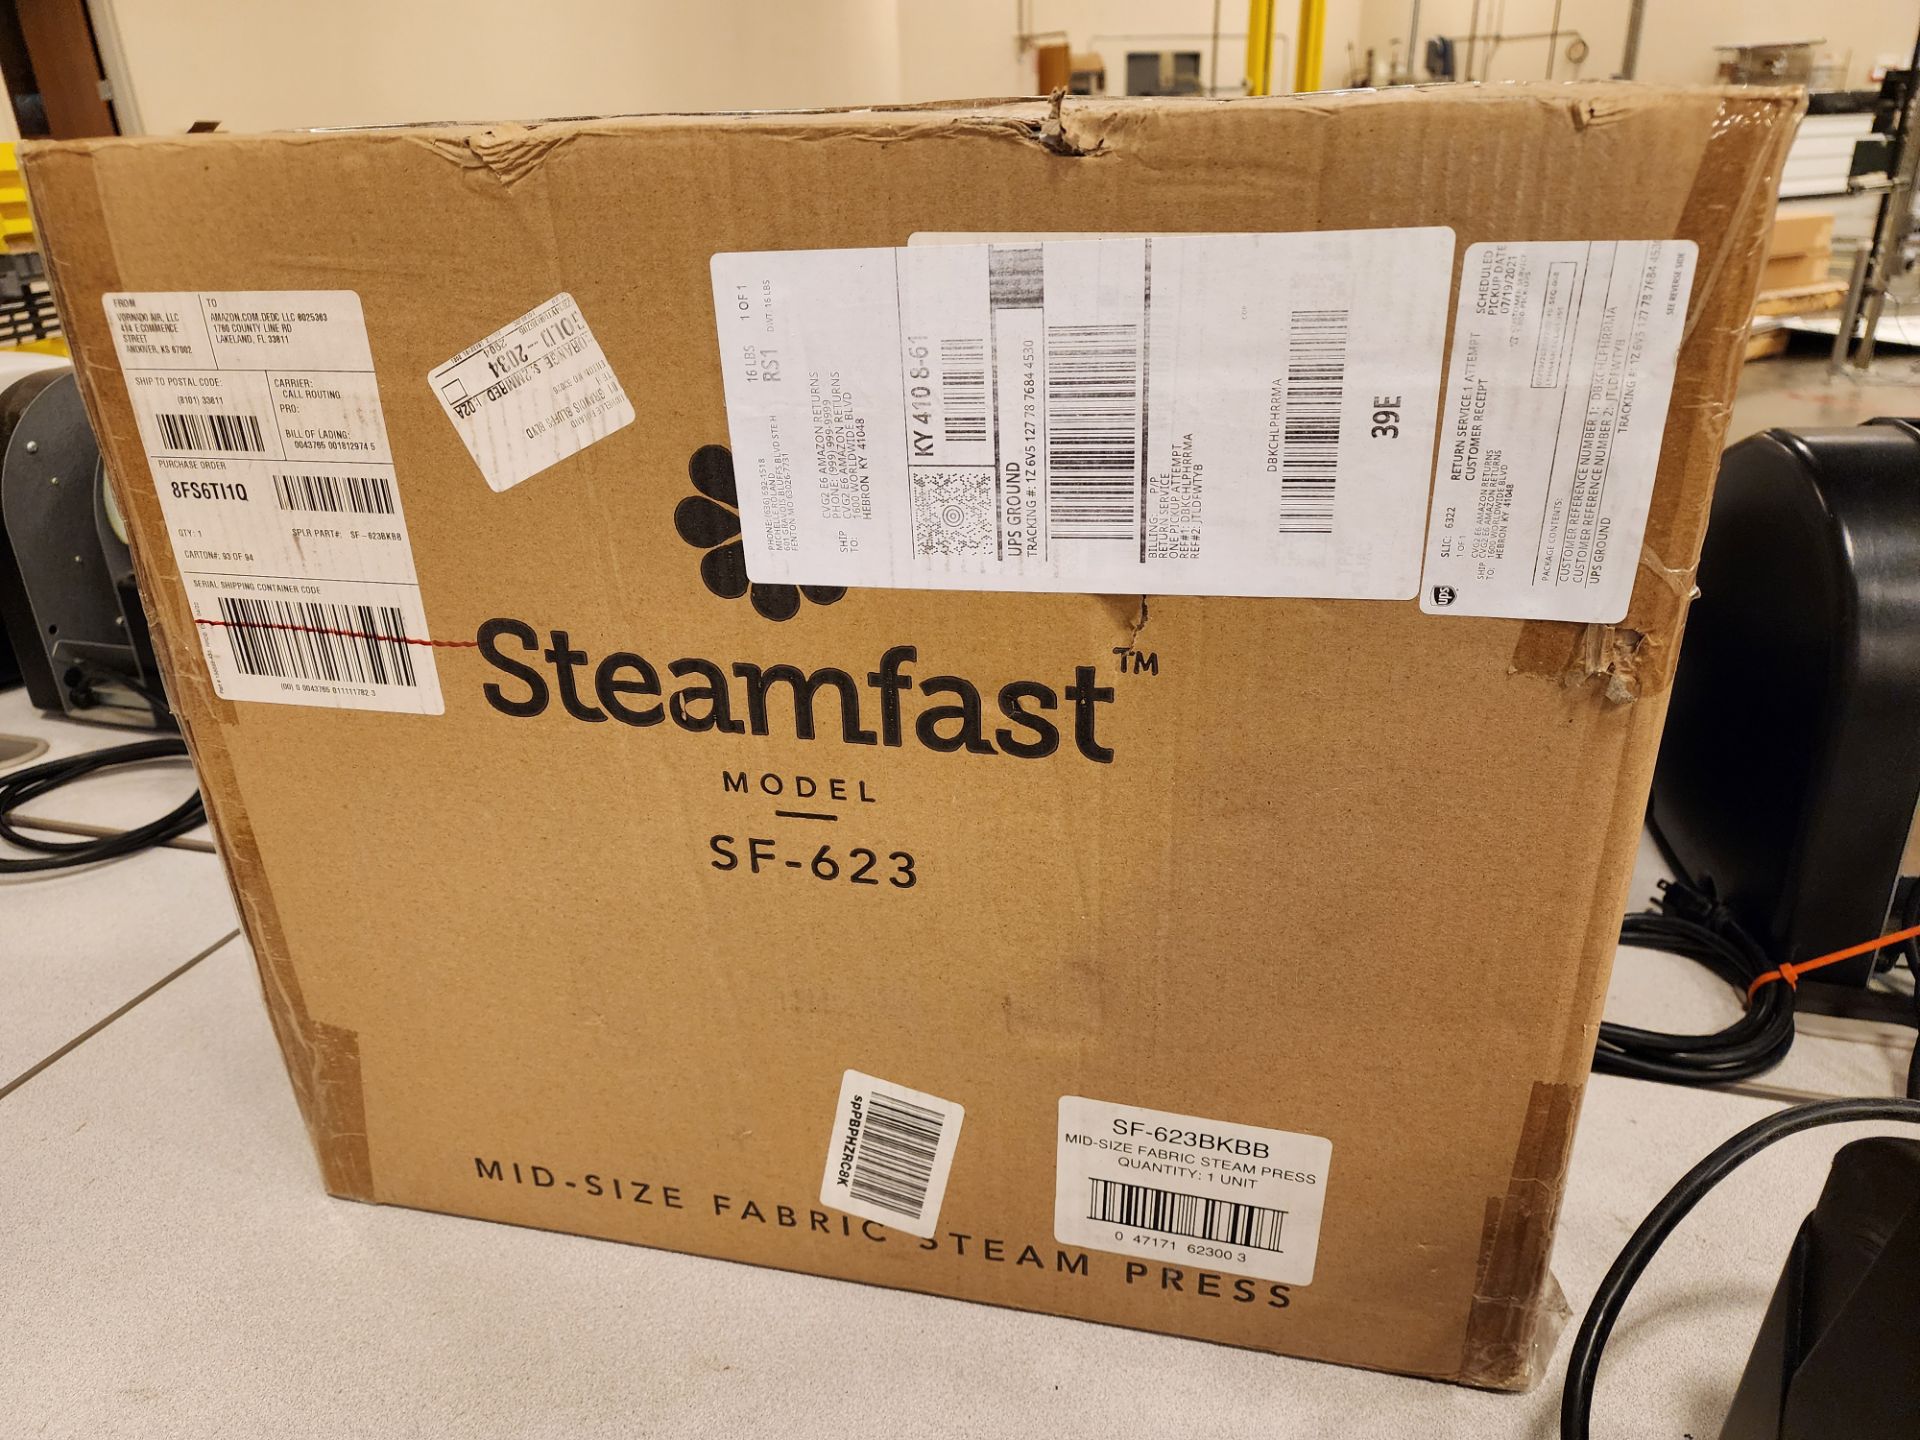 Lot of (2) Streamfast Mid-Size Fabric Steam Presses - Image 6 of 6